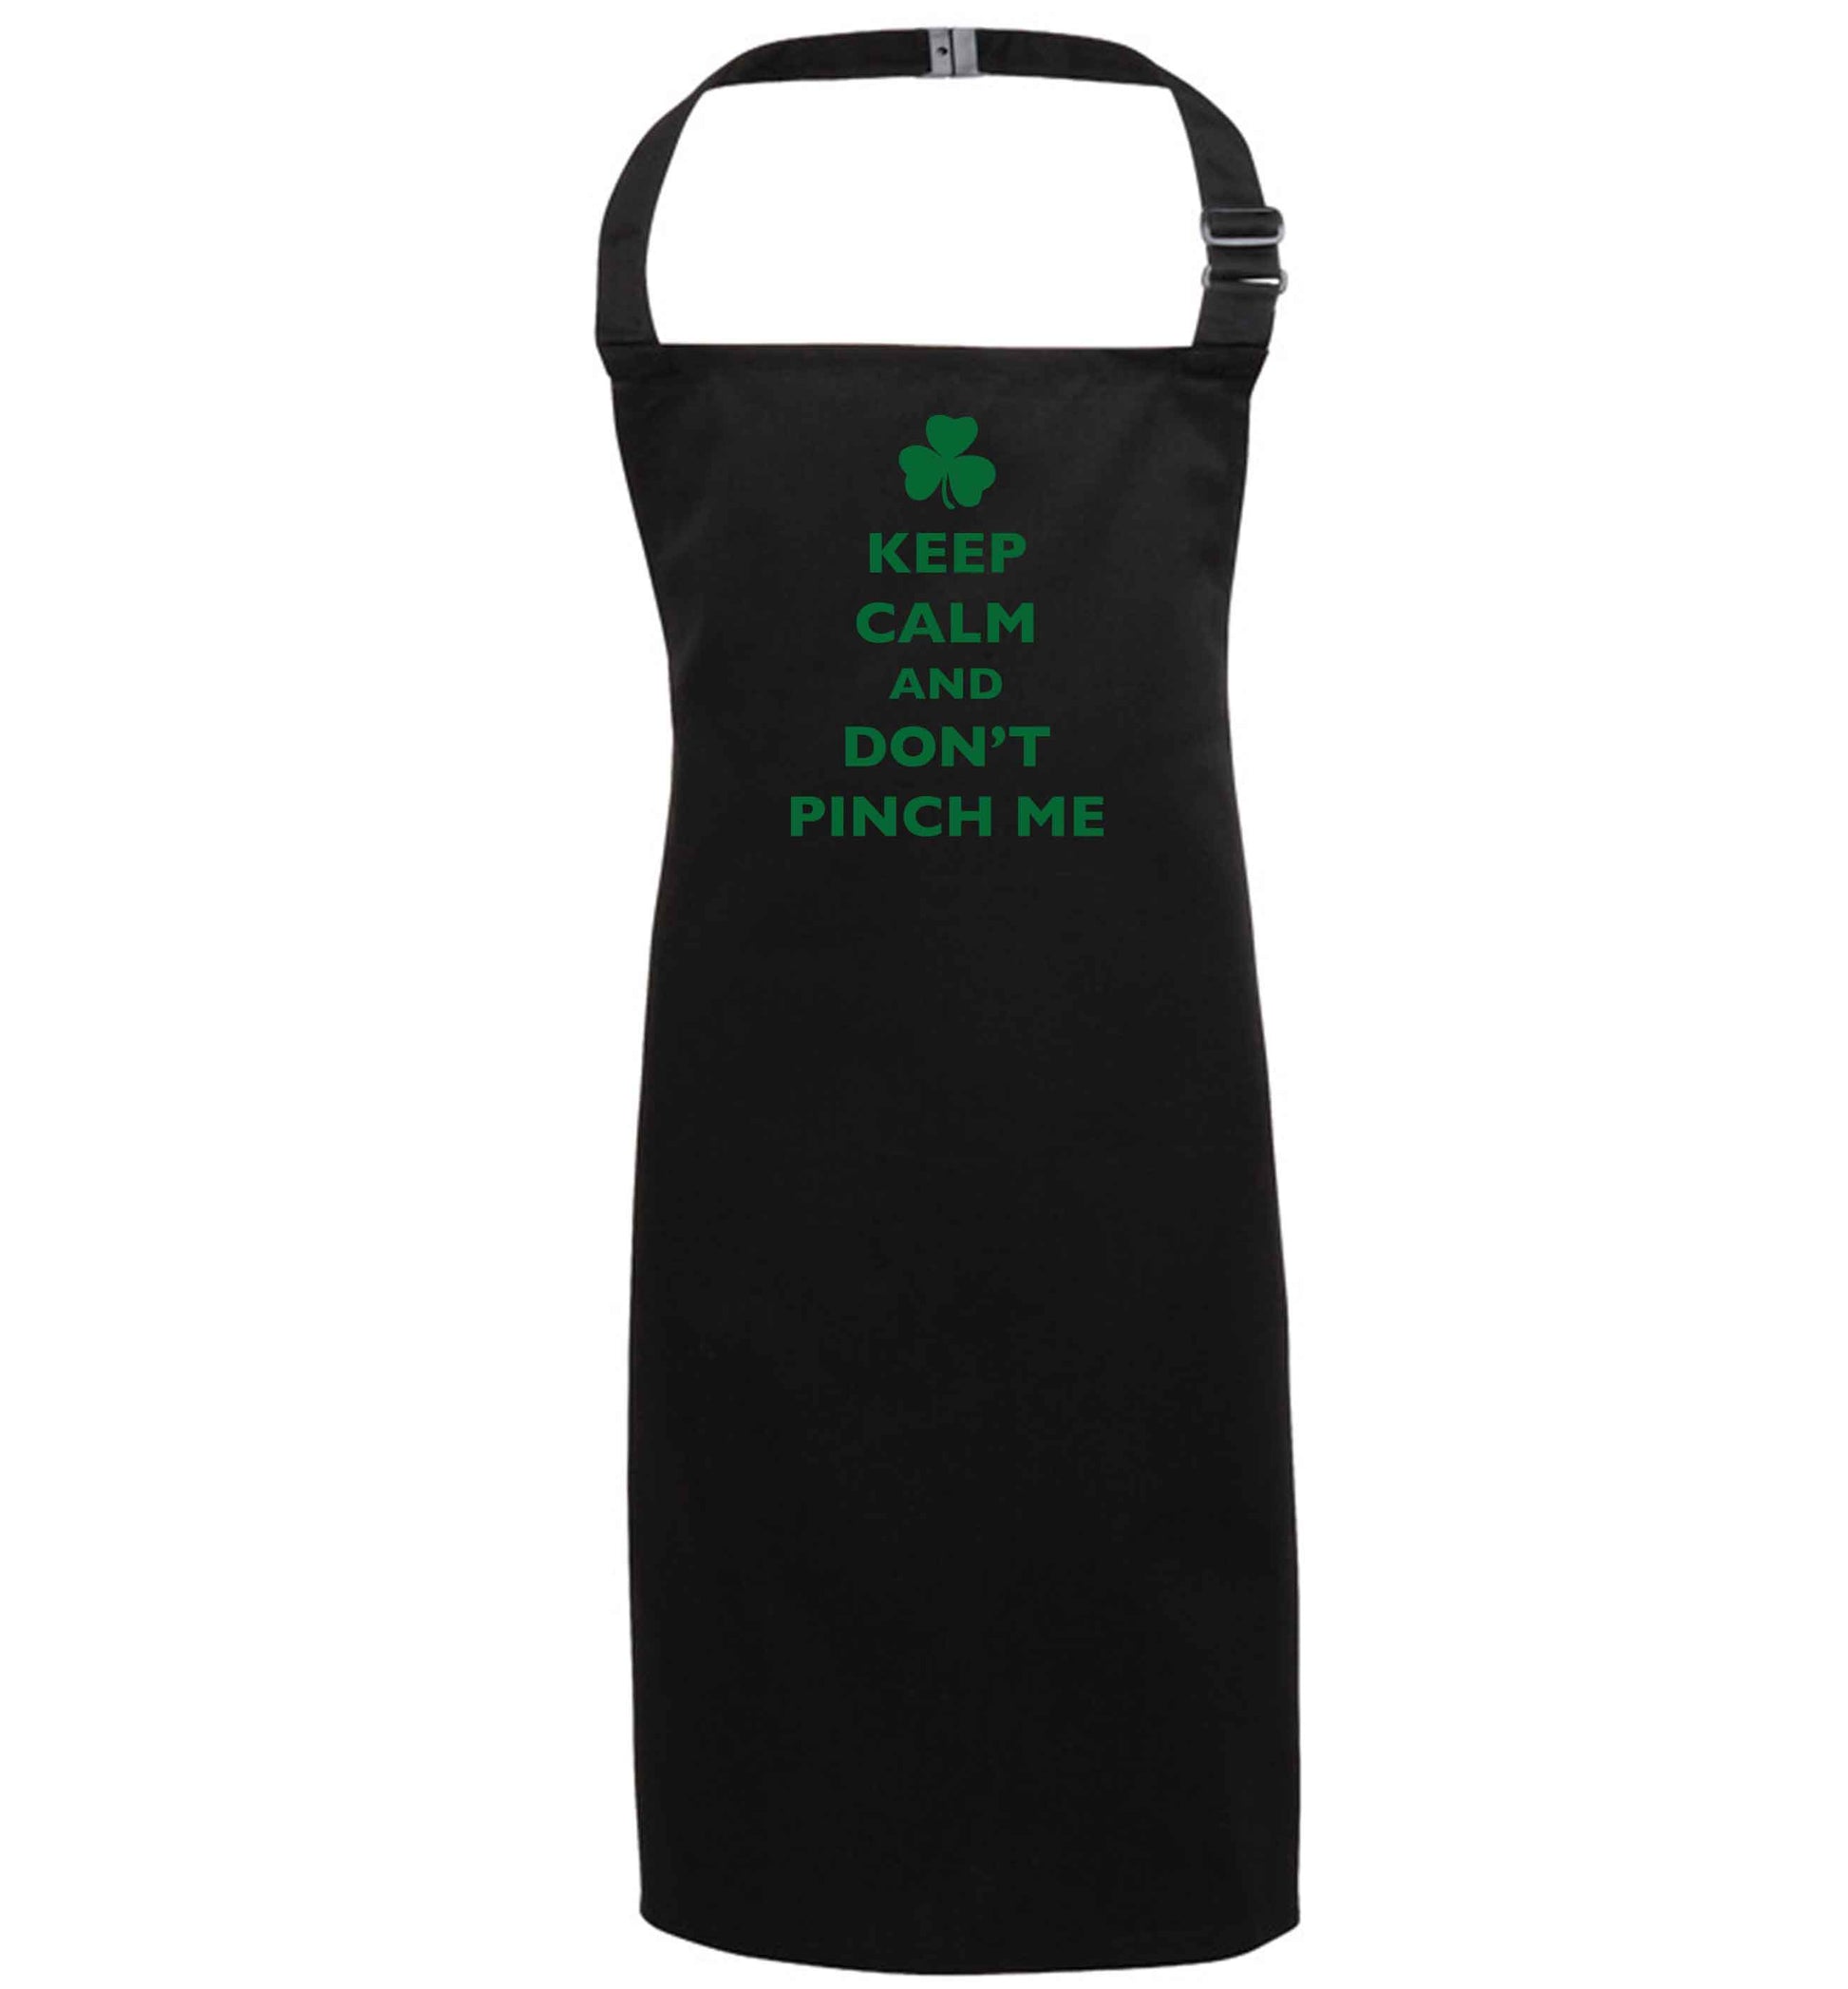 Keep calm and don't pinch me black apron 7-10 years